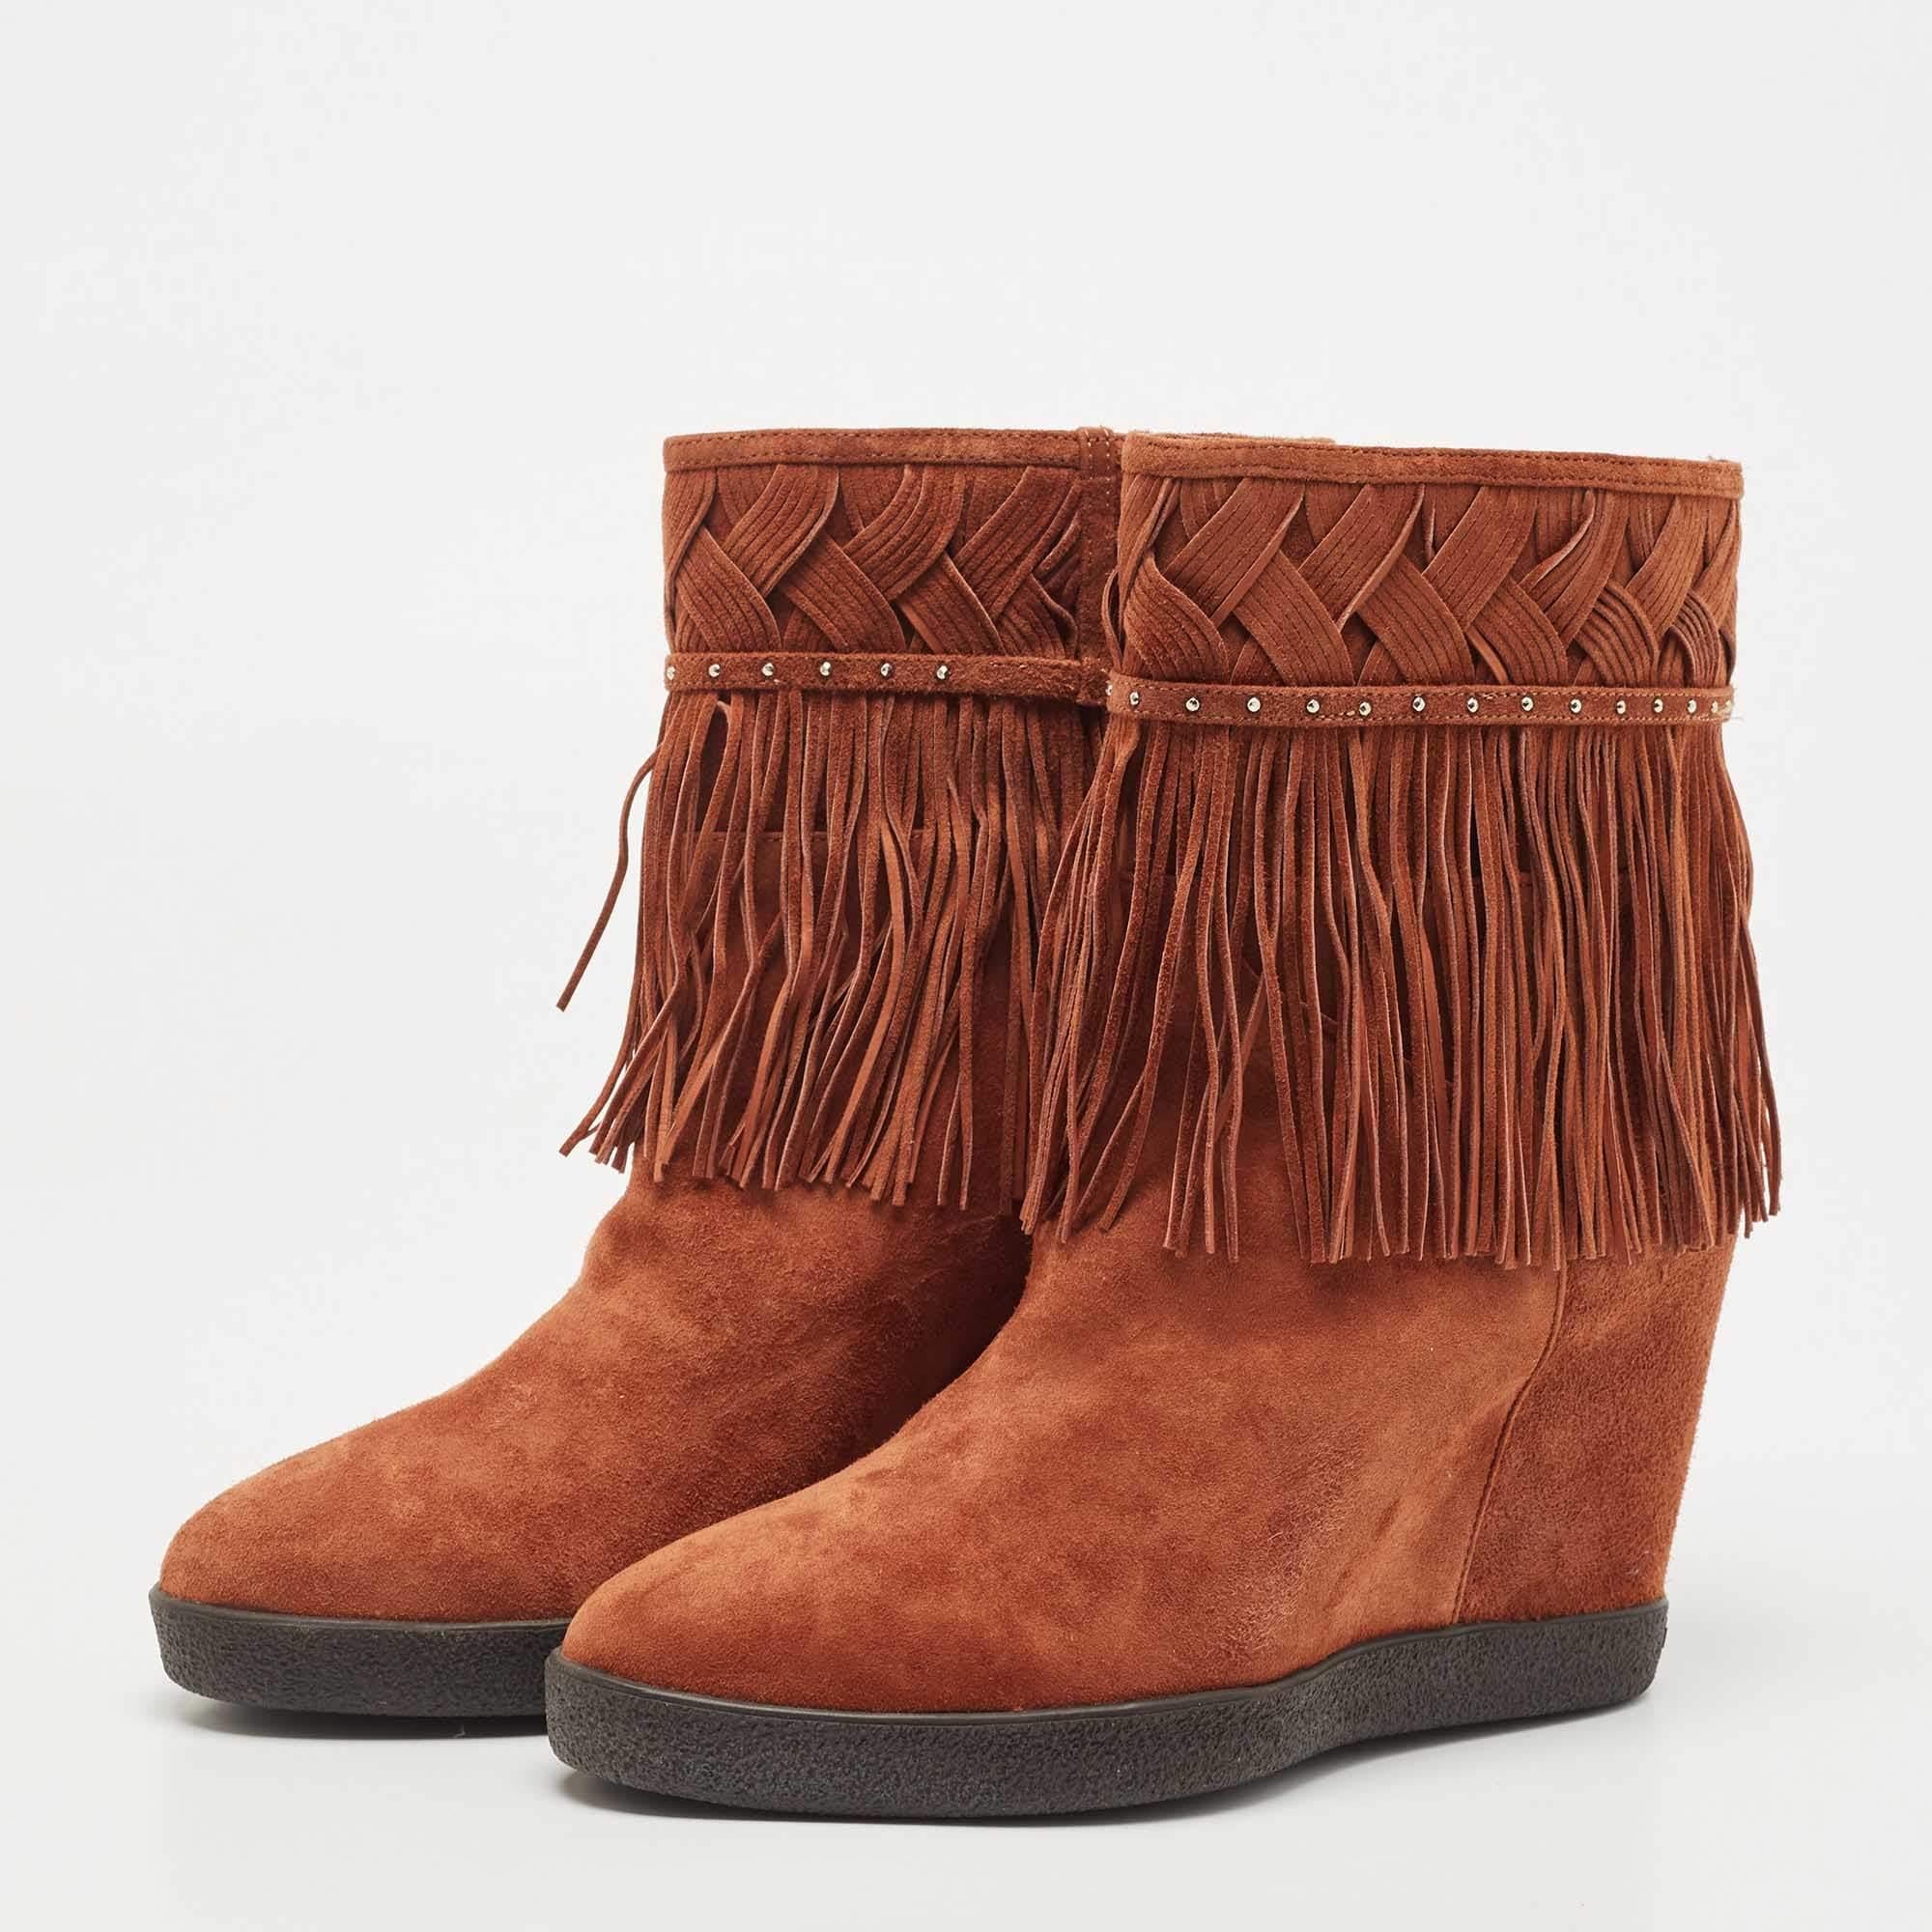 Women's Le Silla Brown Suede Fringe Ankle Length Boots Size 38.5